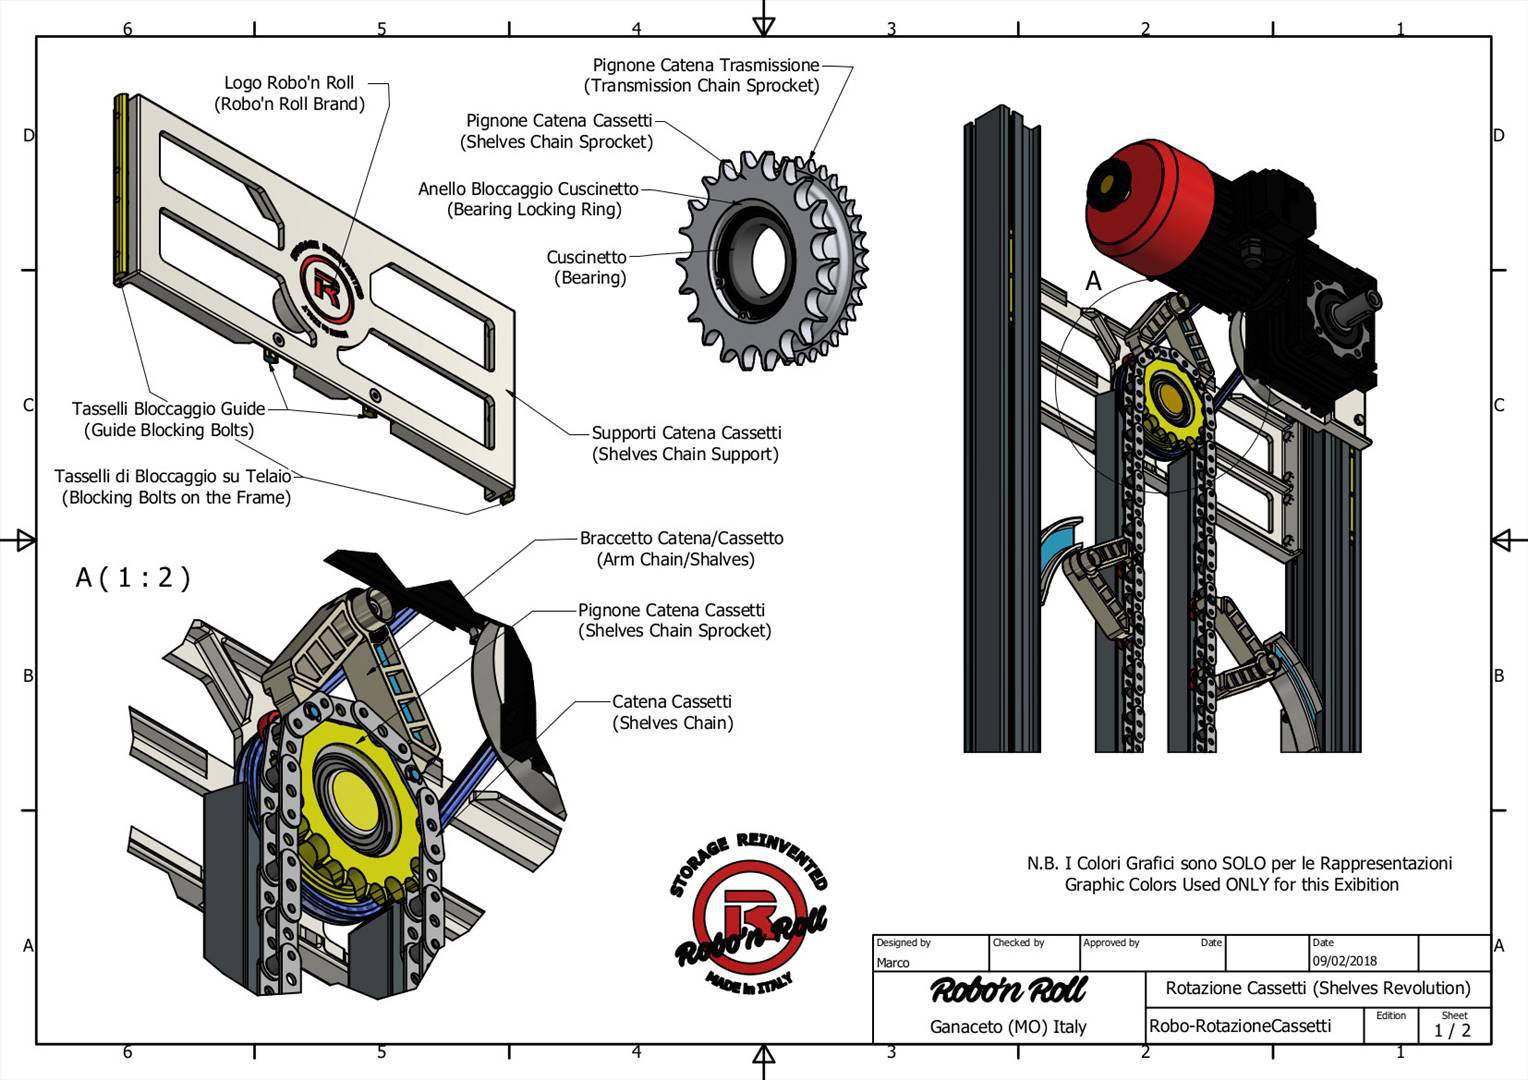 Overview of the gears moving the chain